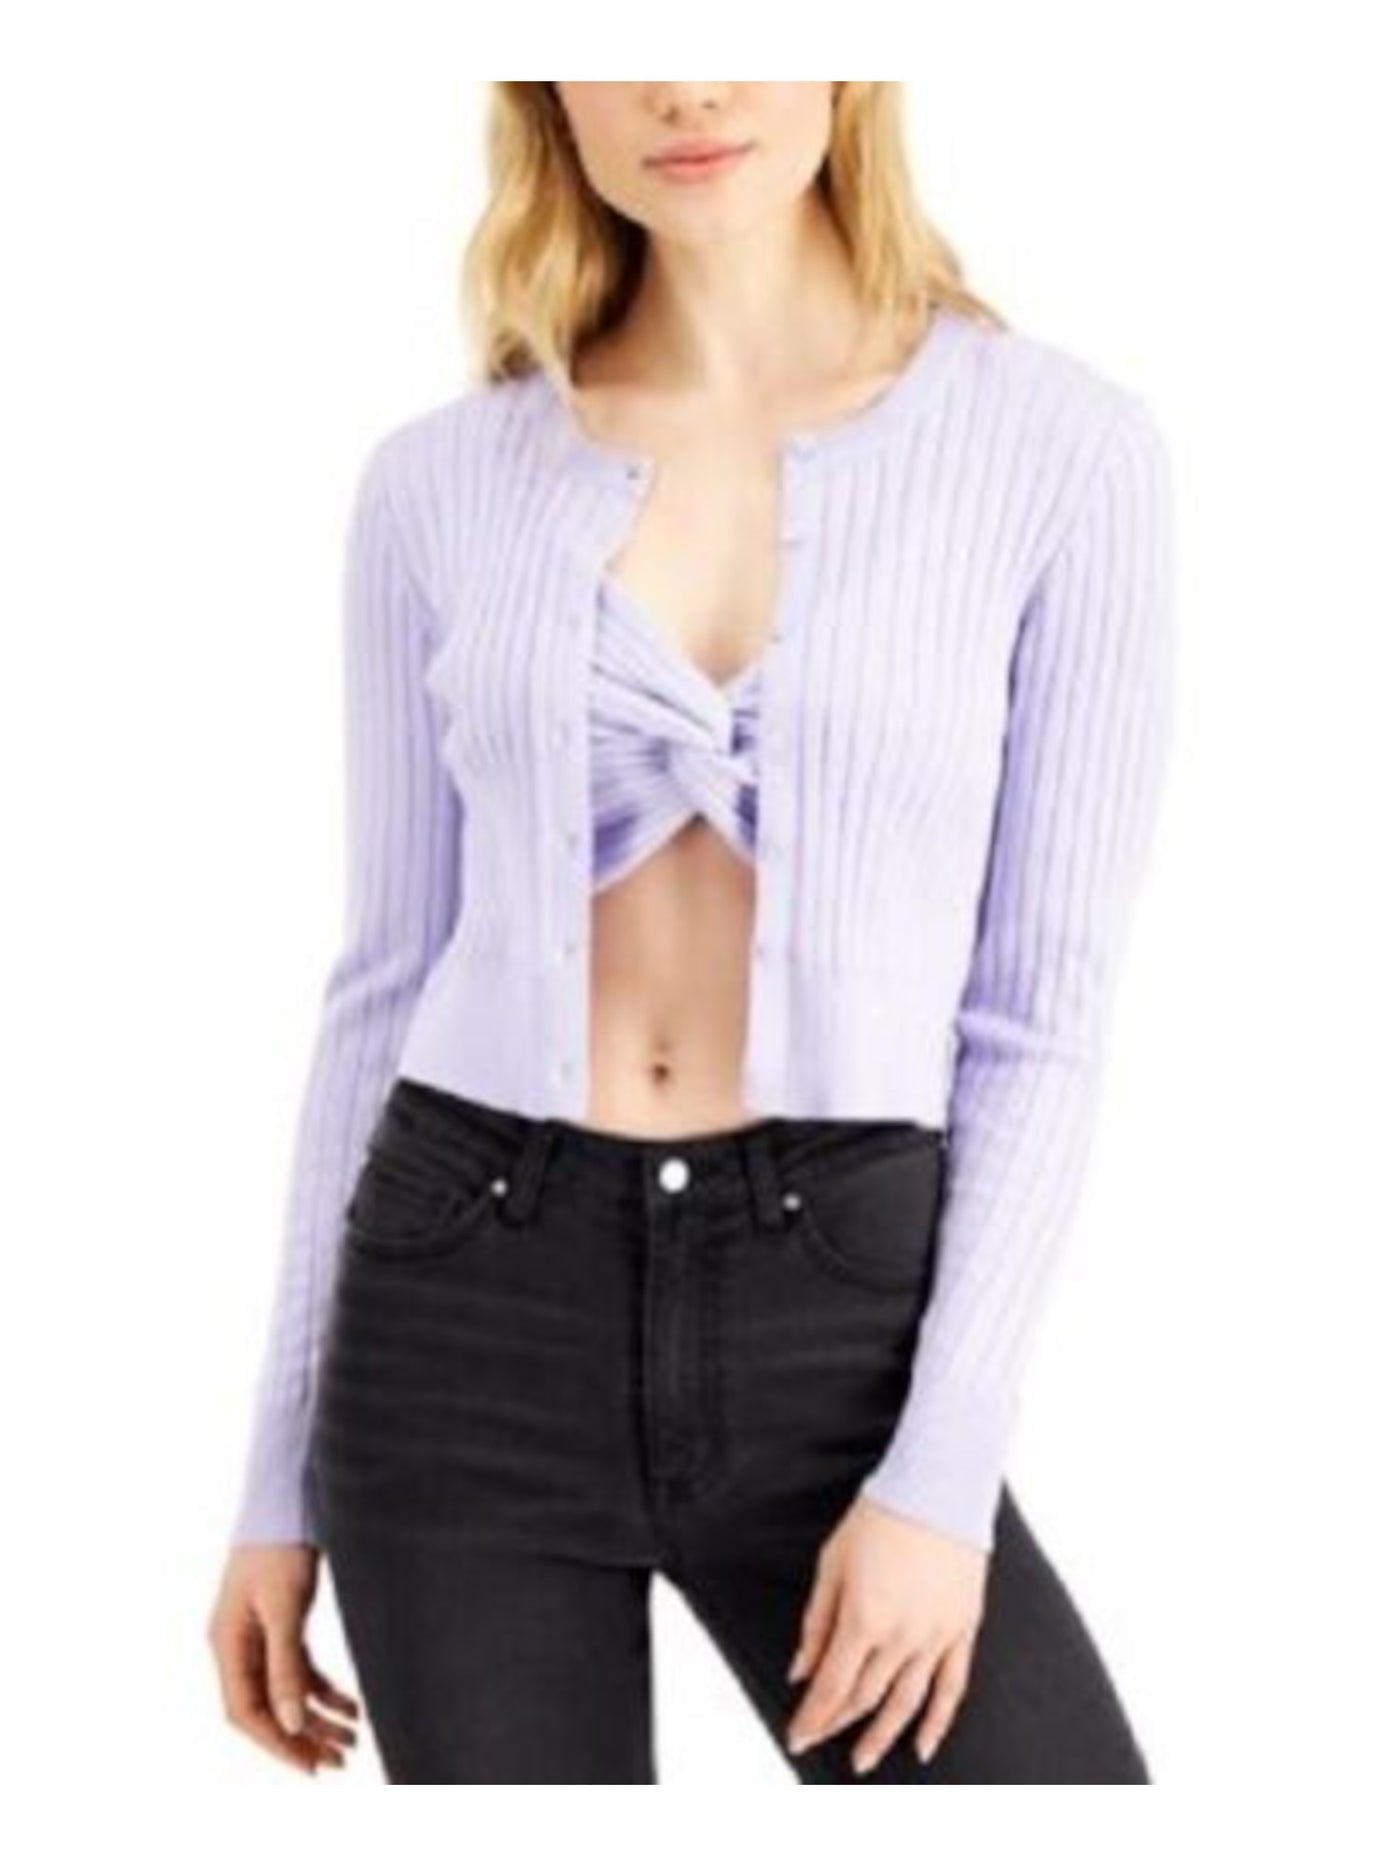 CRAVE FAME Womens Purple Twist Front Ribbed Adjustable Spaghetti Strap V Neck Crop Top Juniors M